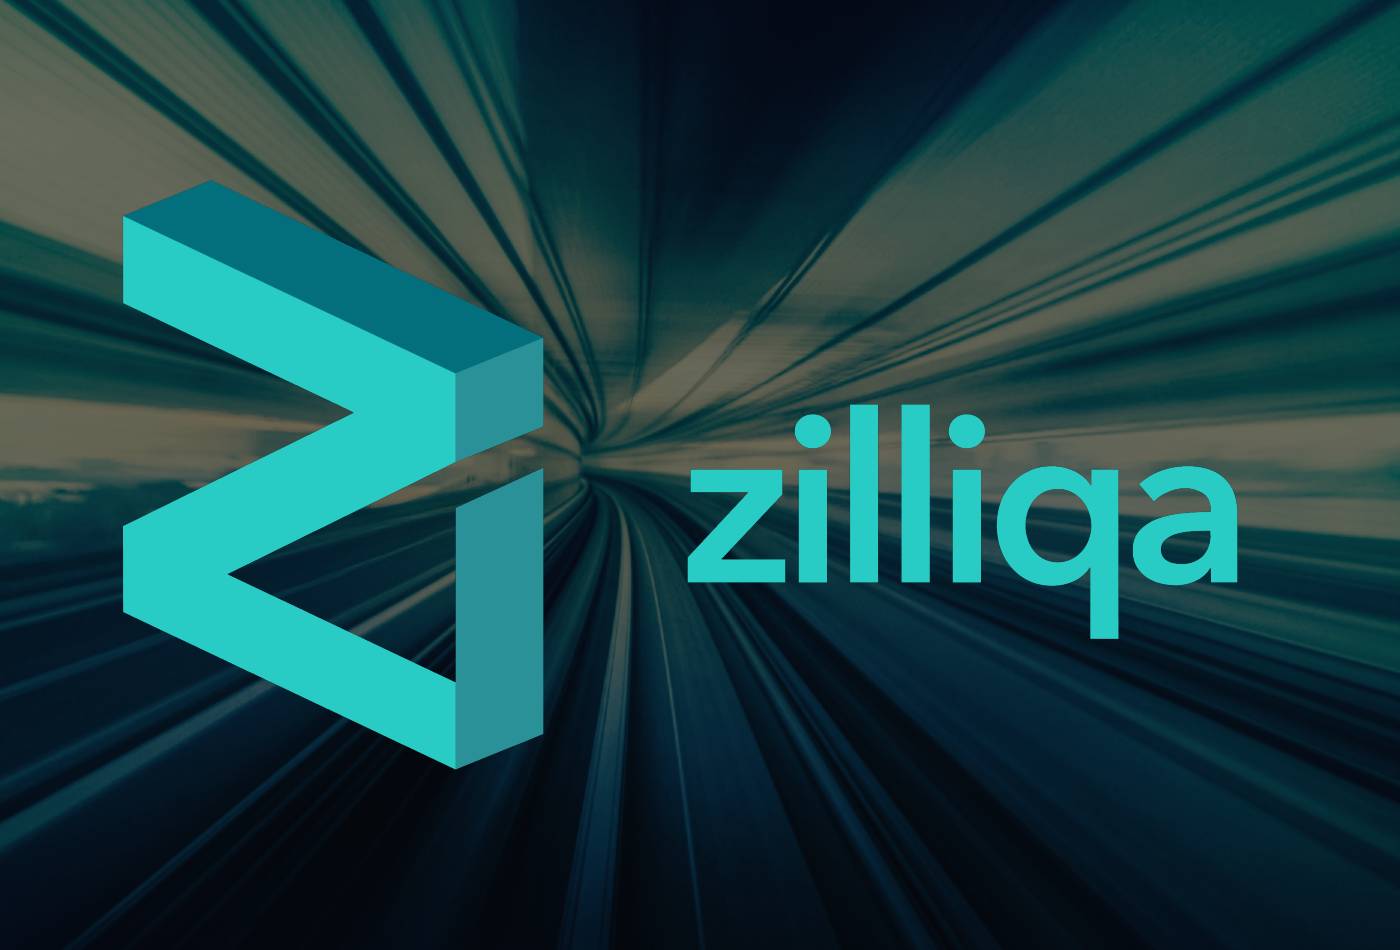 Zilliqa (ZIL) Price Prediction 2022-2030: The Most Realistic Analysis